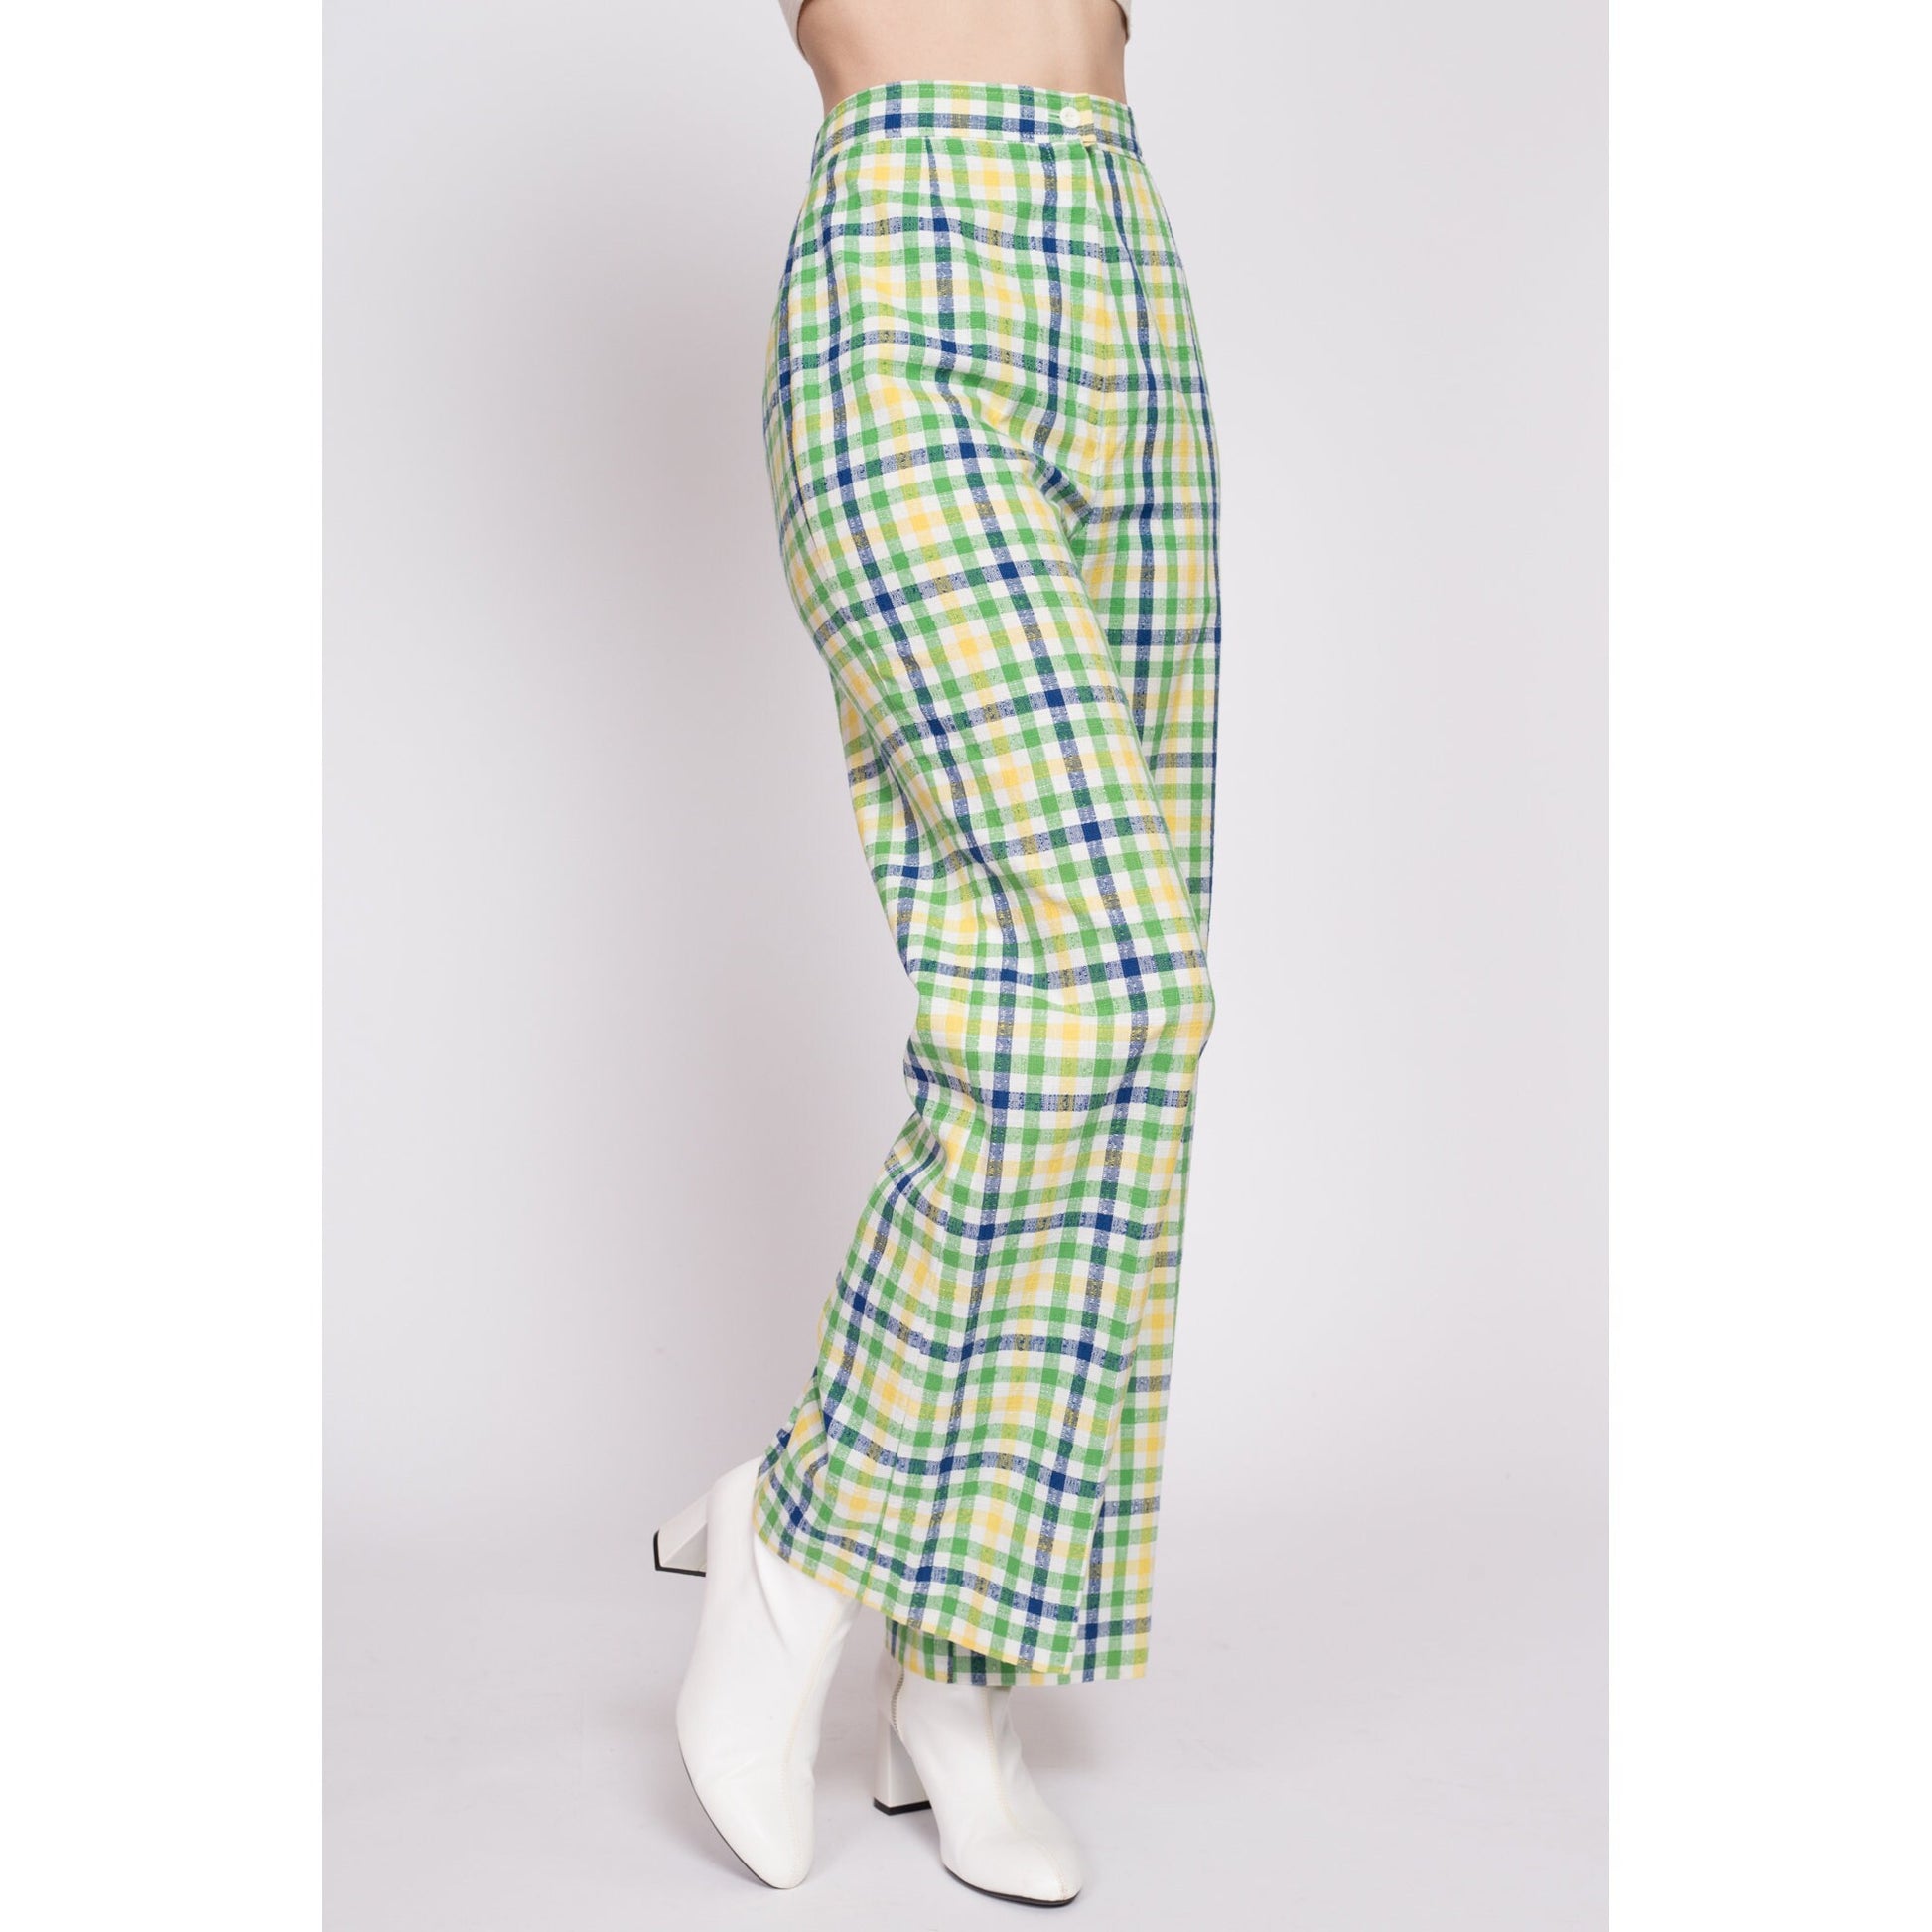 70s Green & Yellow Plaid High Waisted Pants - Small to Medium, 27" | Vintage Flared Leg Retro Trousers